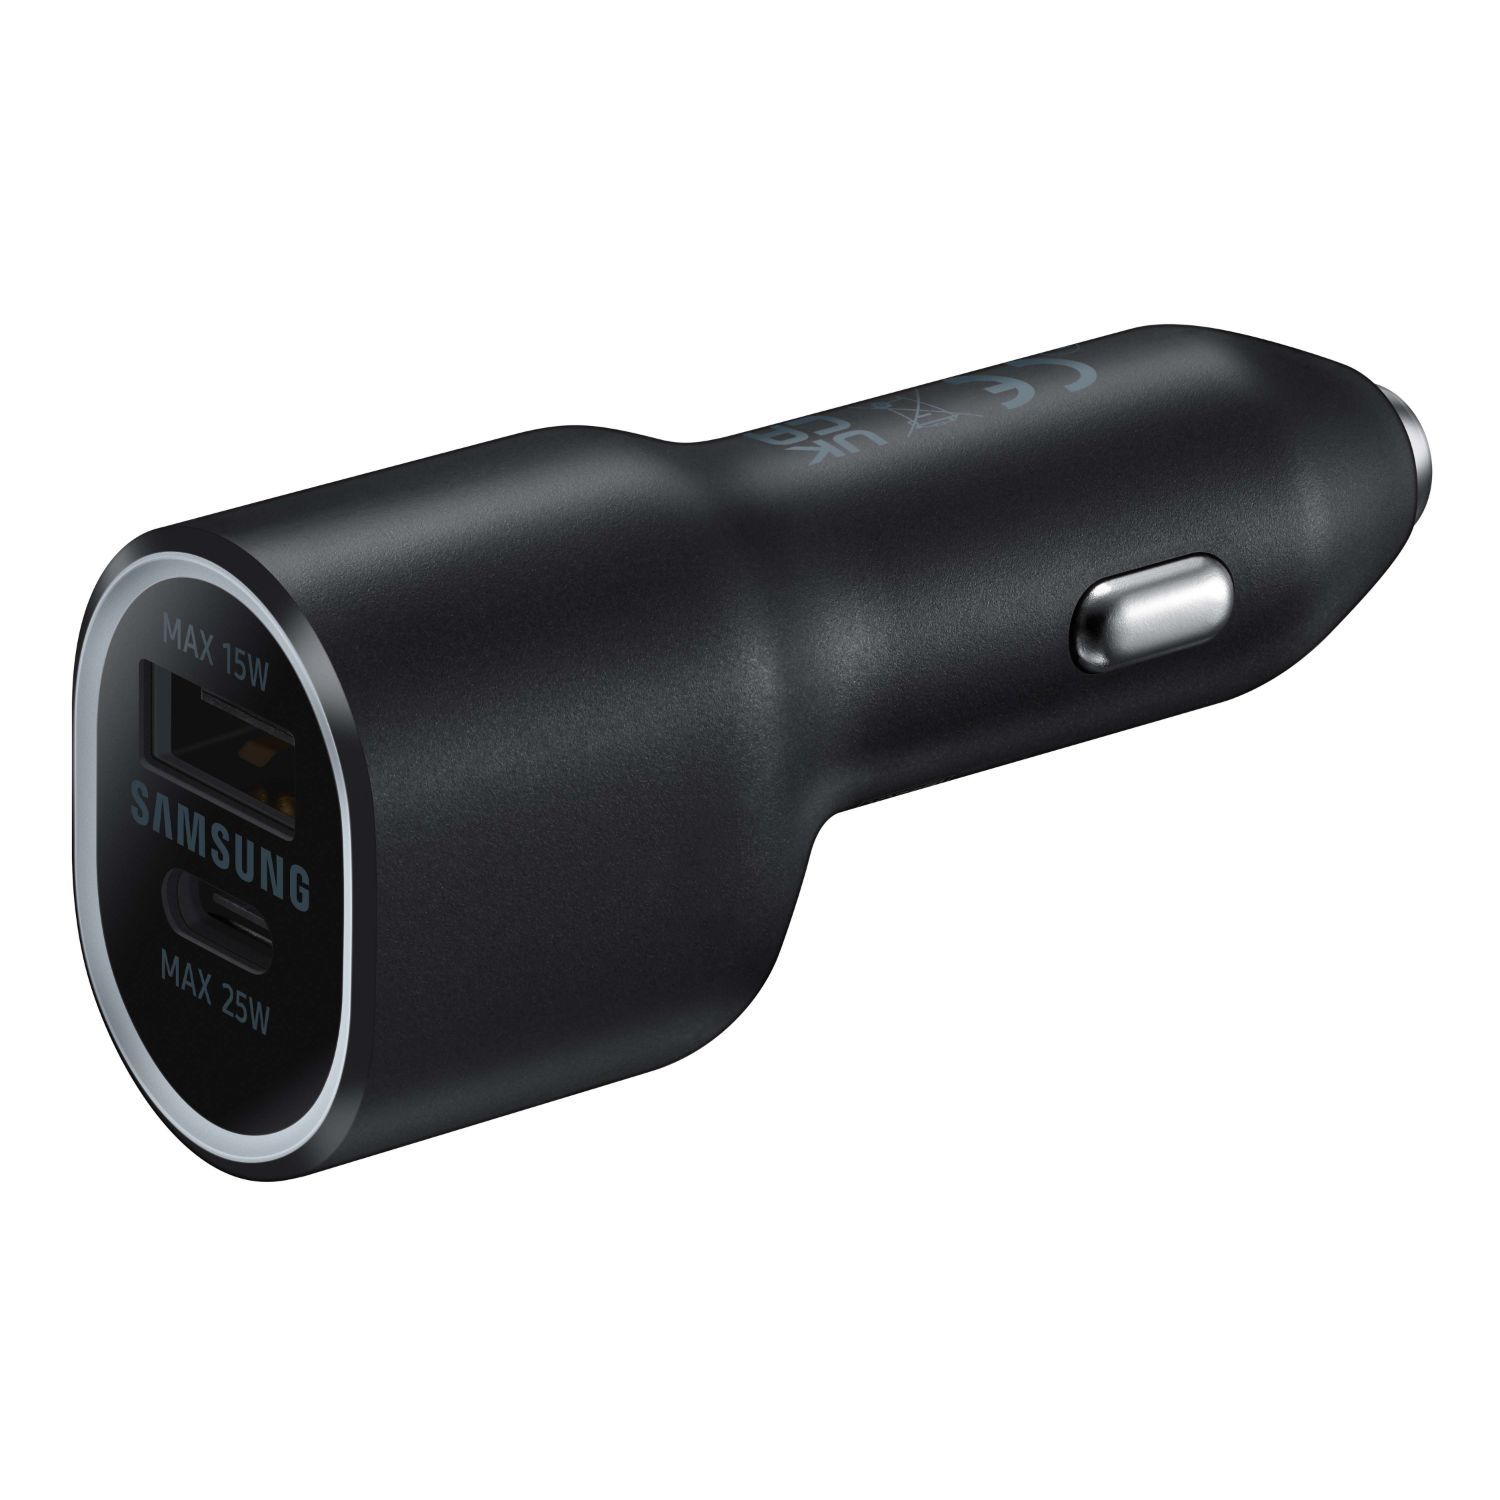 Car Chargers for Samsung mobile devices